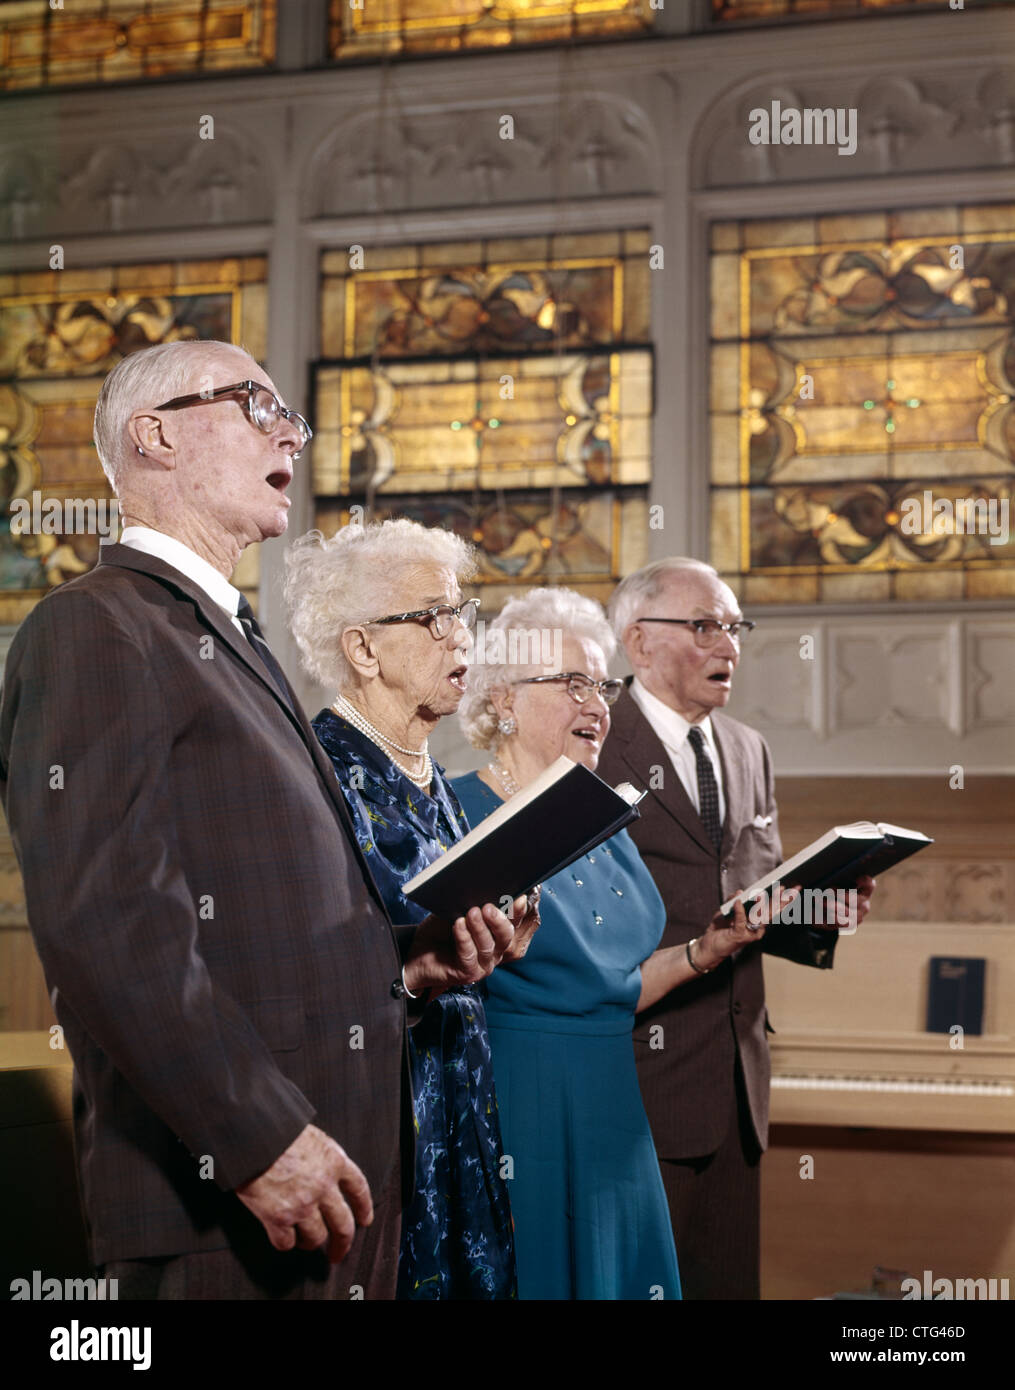 1960s TWO ELDERLY COUPLES IN CHURCH SINGING FROM HYMNAL BOOKS Stock Photo